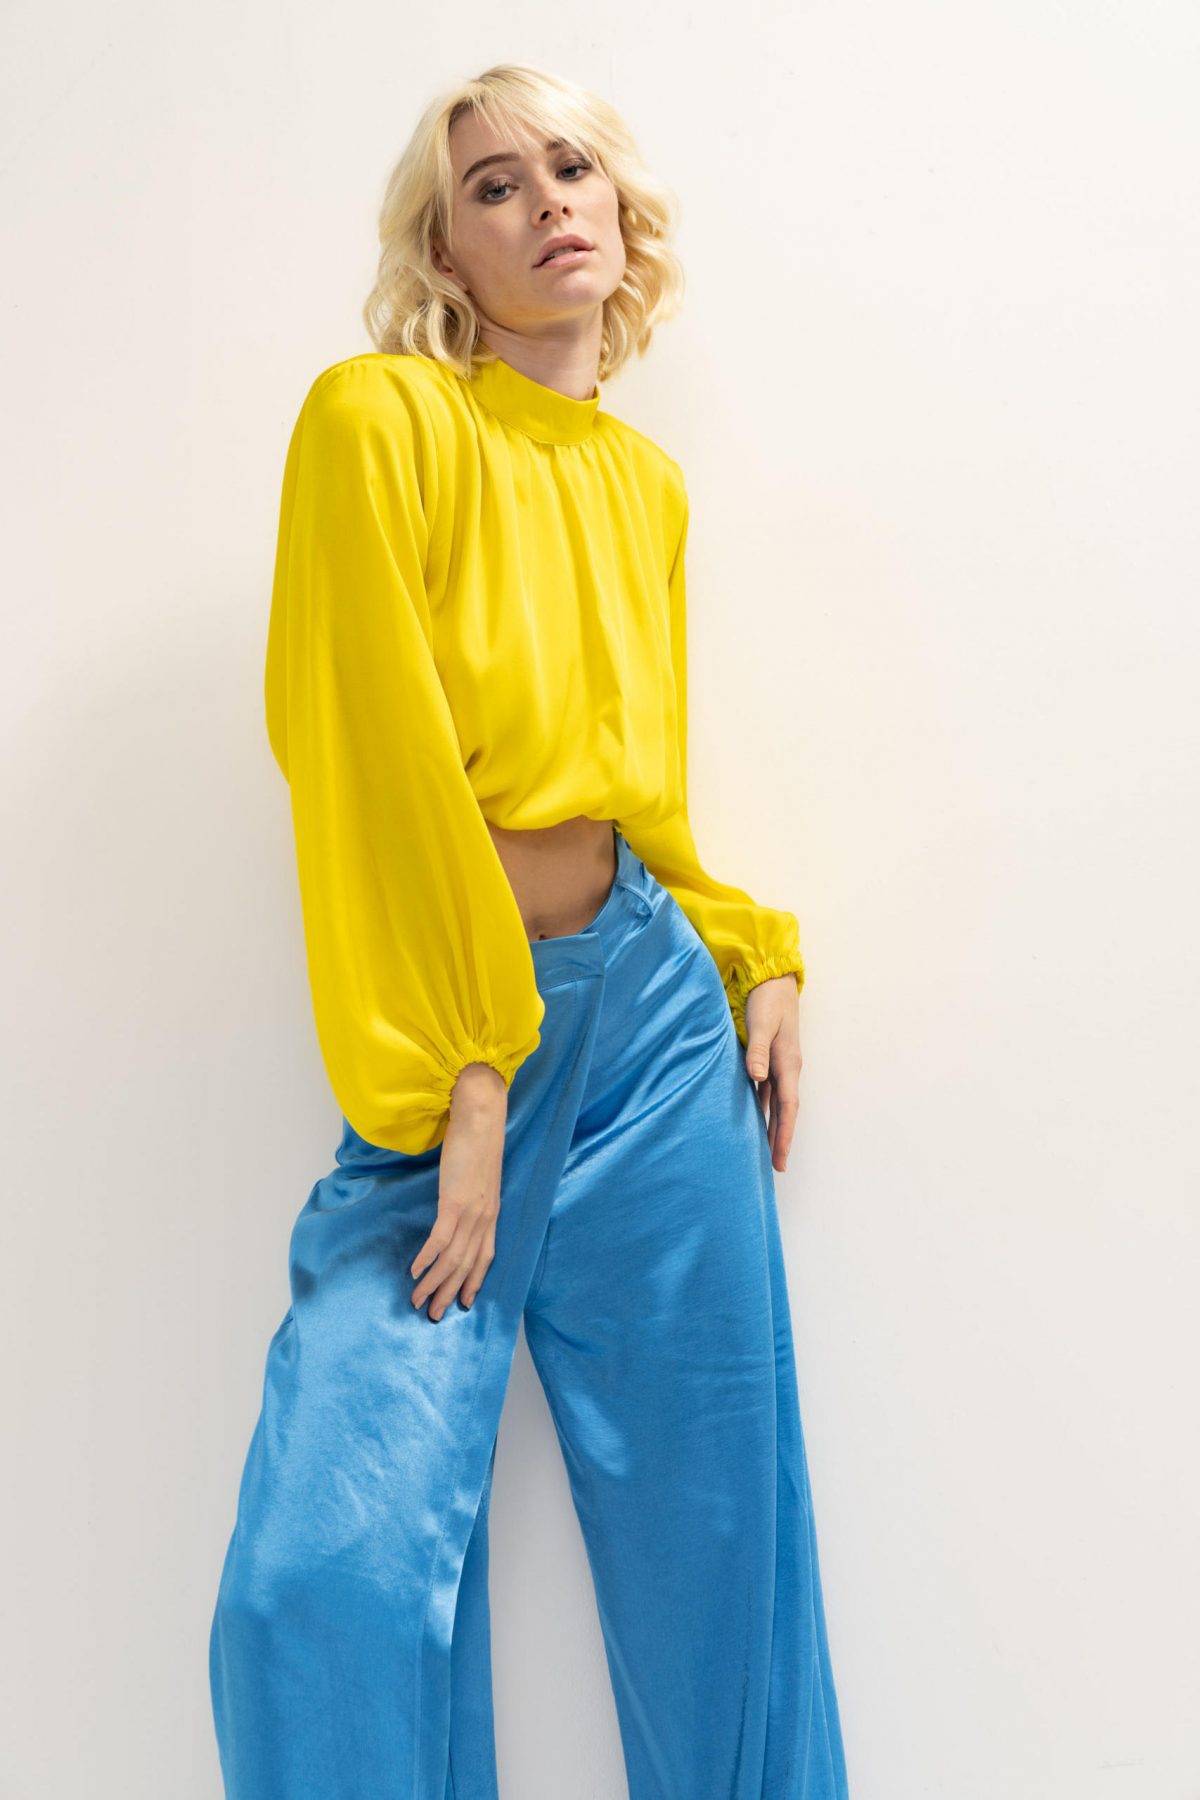 Satin long-sleeved crop top in yellow